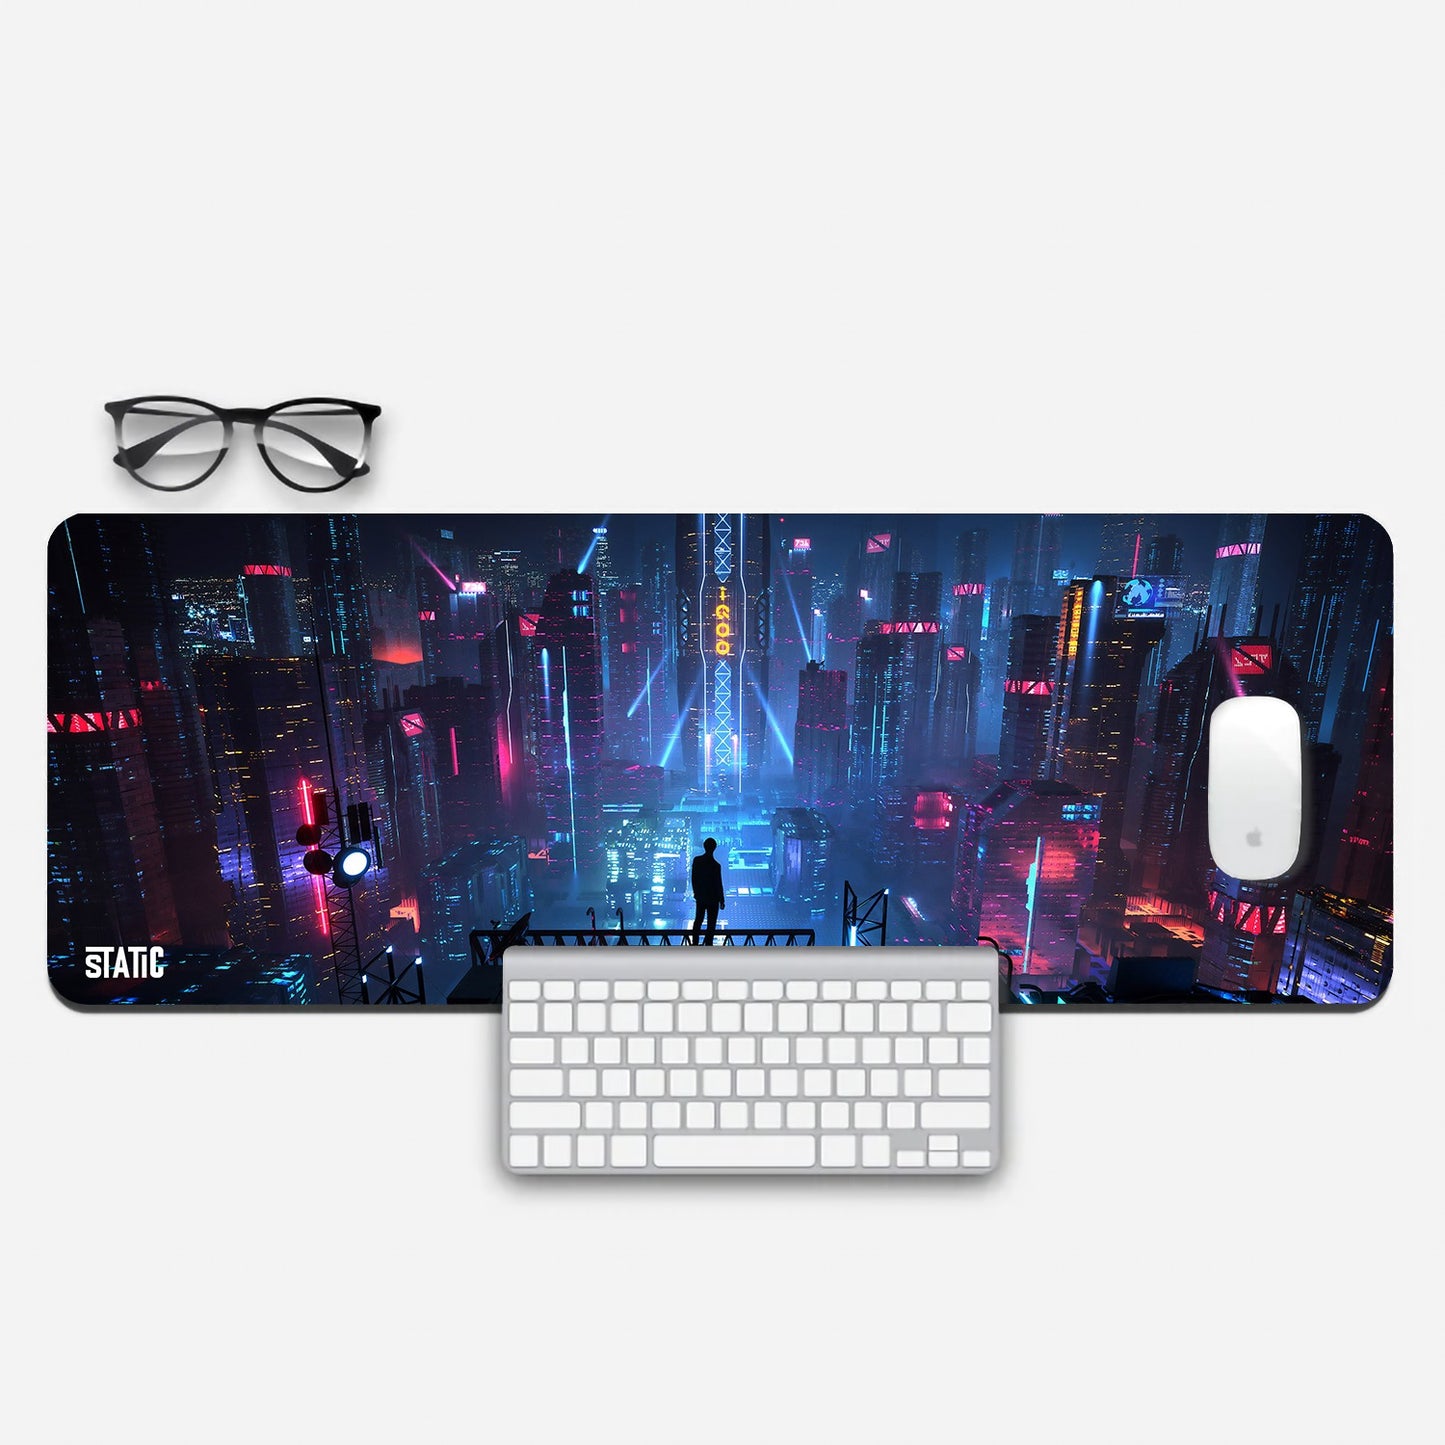 Elevate your gaming setup with our Futuristic City Extended Gaming Mouse Pad. Immerse yourself in a dazzling cityscape with a mysterious silhouette in the foreground, creating an atmosphere of urban mystique. This mouse pad combines artistic flair with precise tracking, ensuring you're ready for action in the digital world. Upgrade your gaming experience with this striking accessory. Get yours now to game in style and comfort.